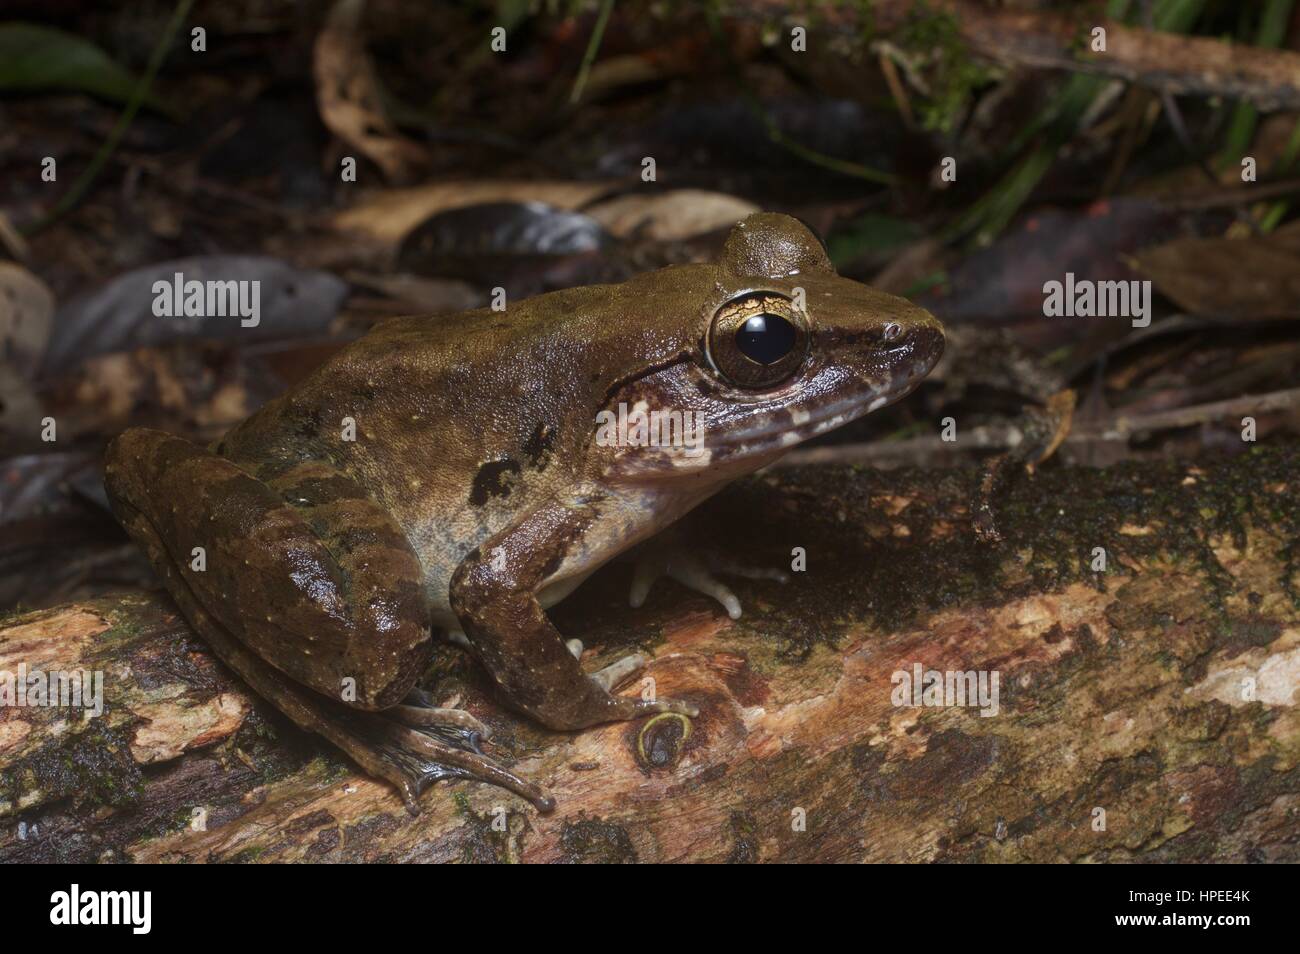 A Giant River Frog (Limnonectes leporinus) in the rainforest at night in Kubah National Park, Sarawak, Borneo Stock Photo